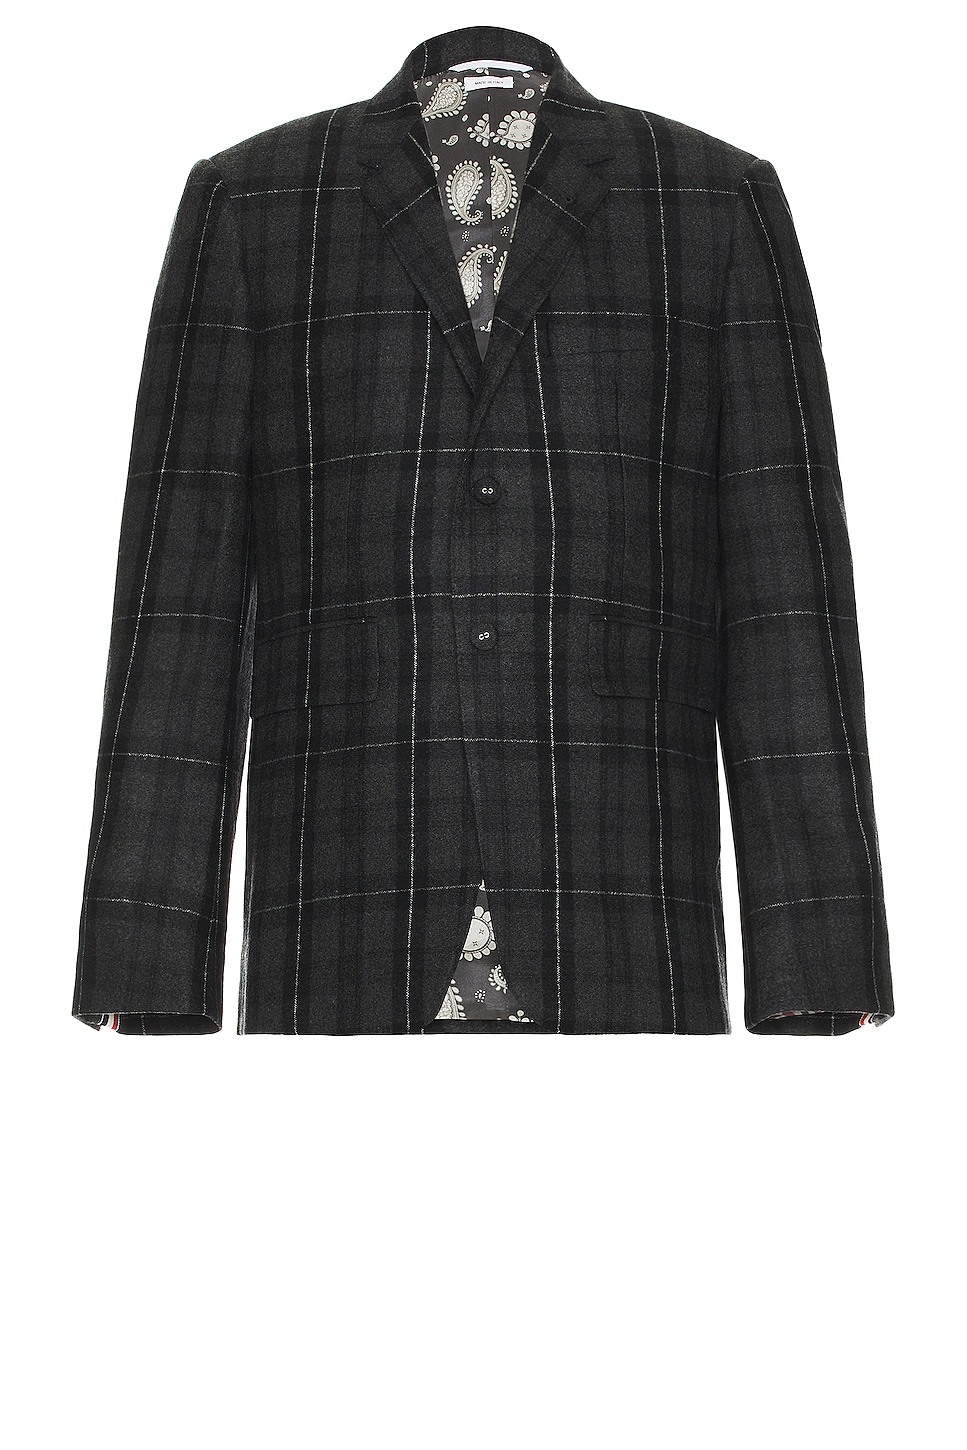 Image 1 of Thom Browne Fit 1 Sb Blazer in Charcoal